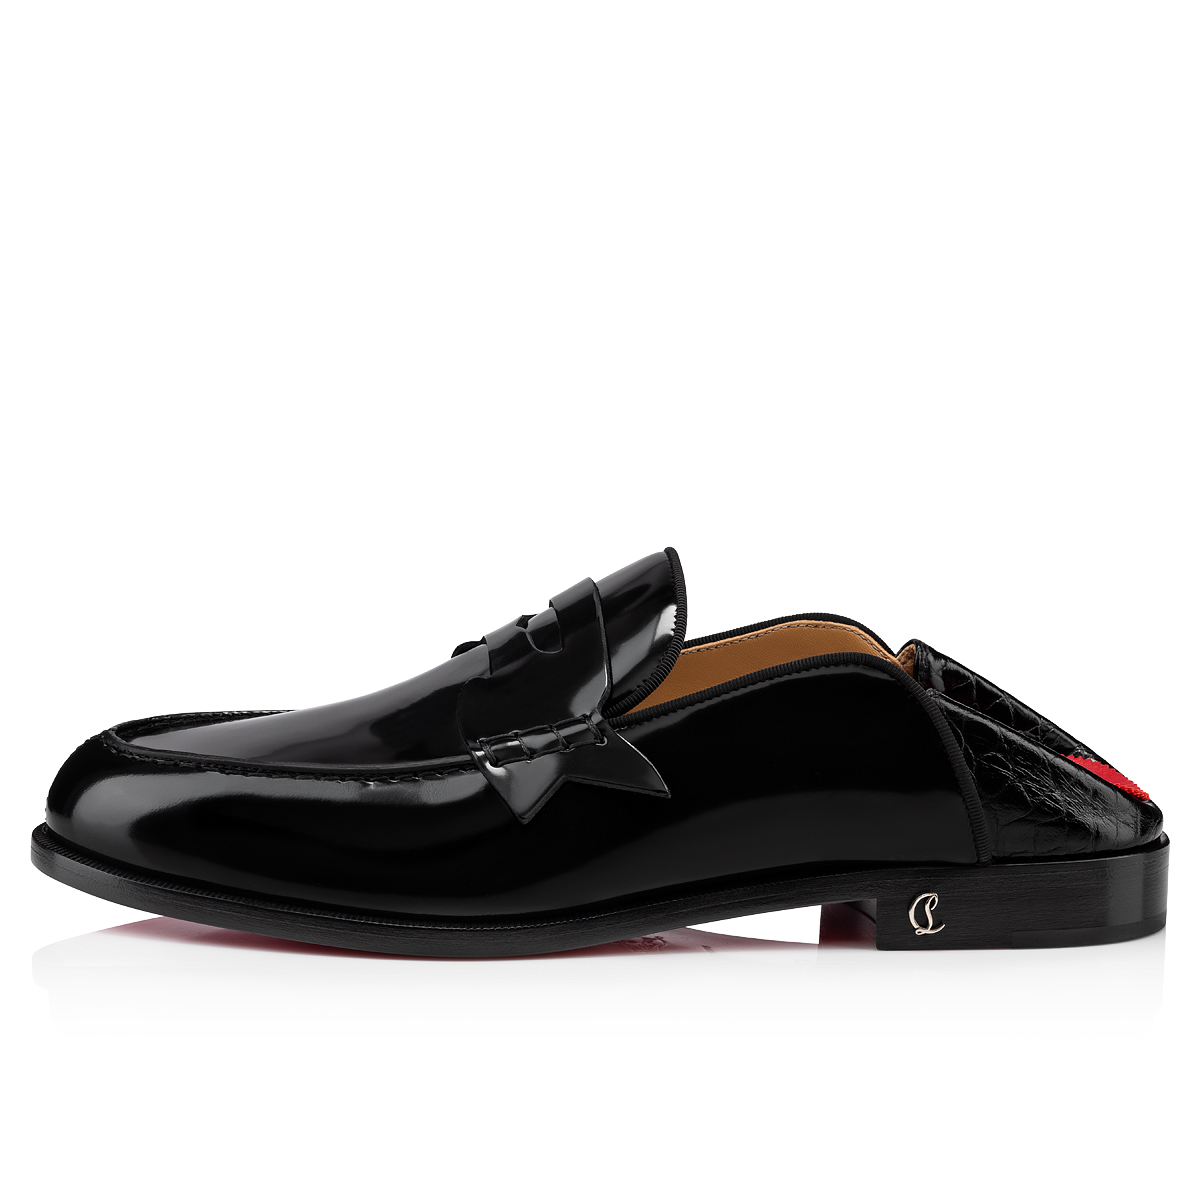 Louis Vuitton Black Patent Leather Logo Slip On Loafers Size 41